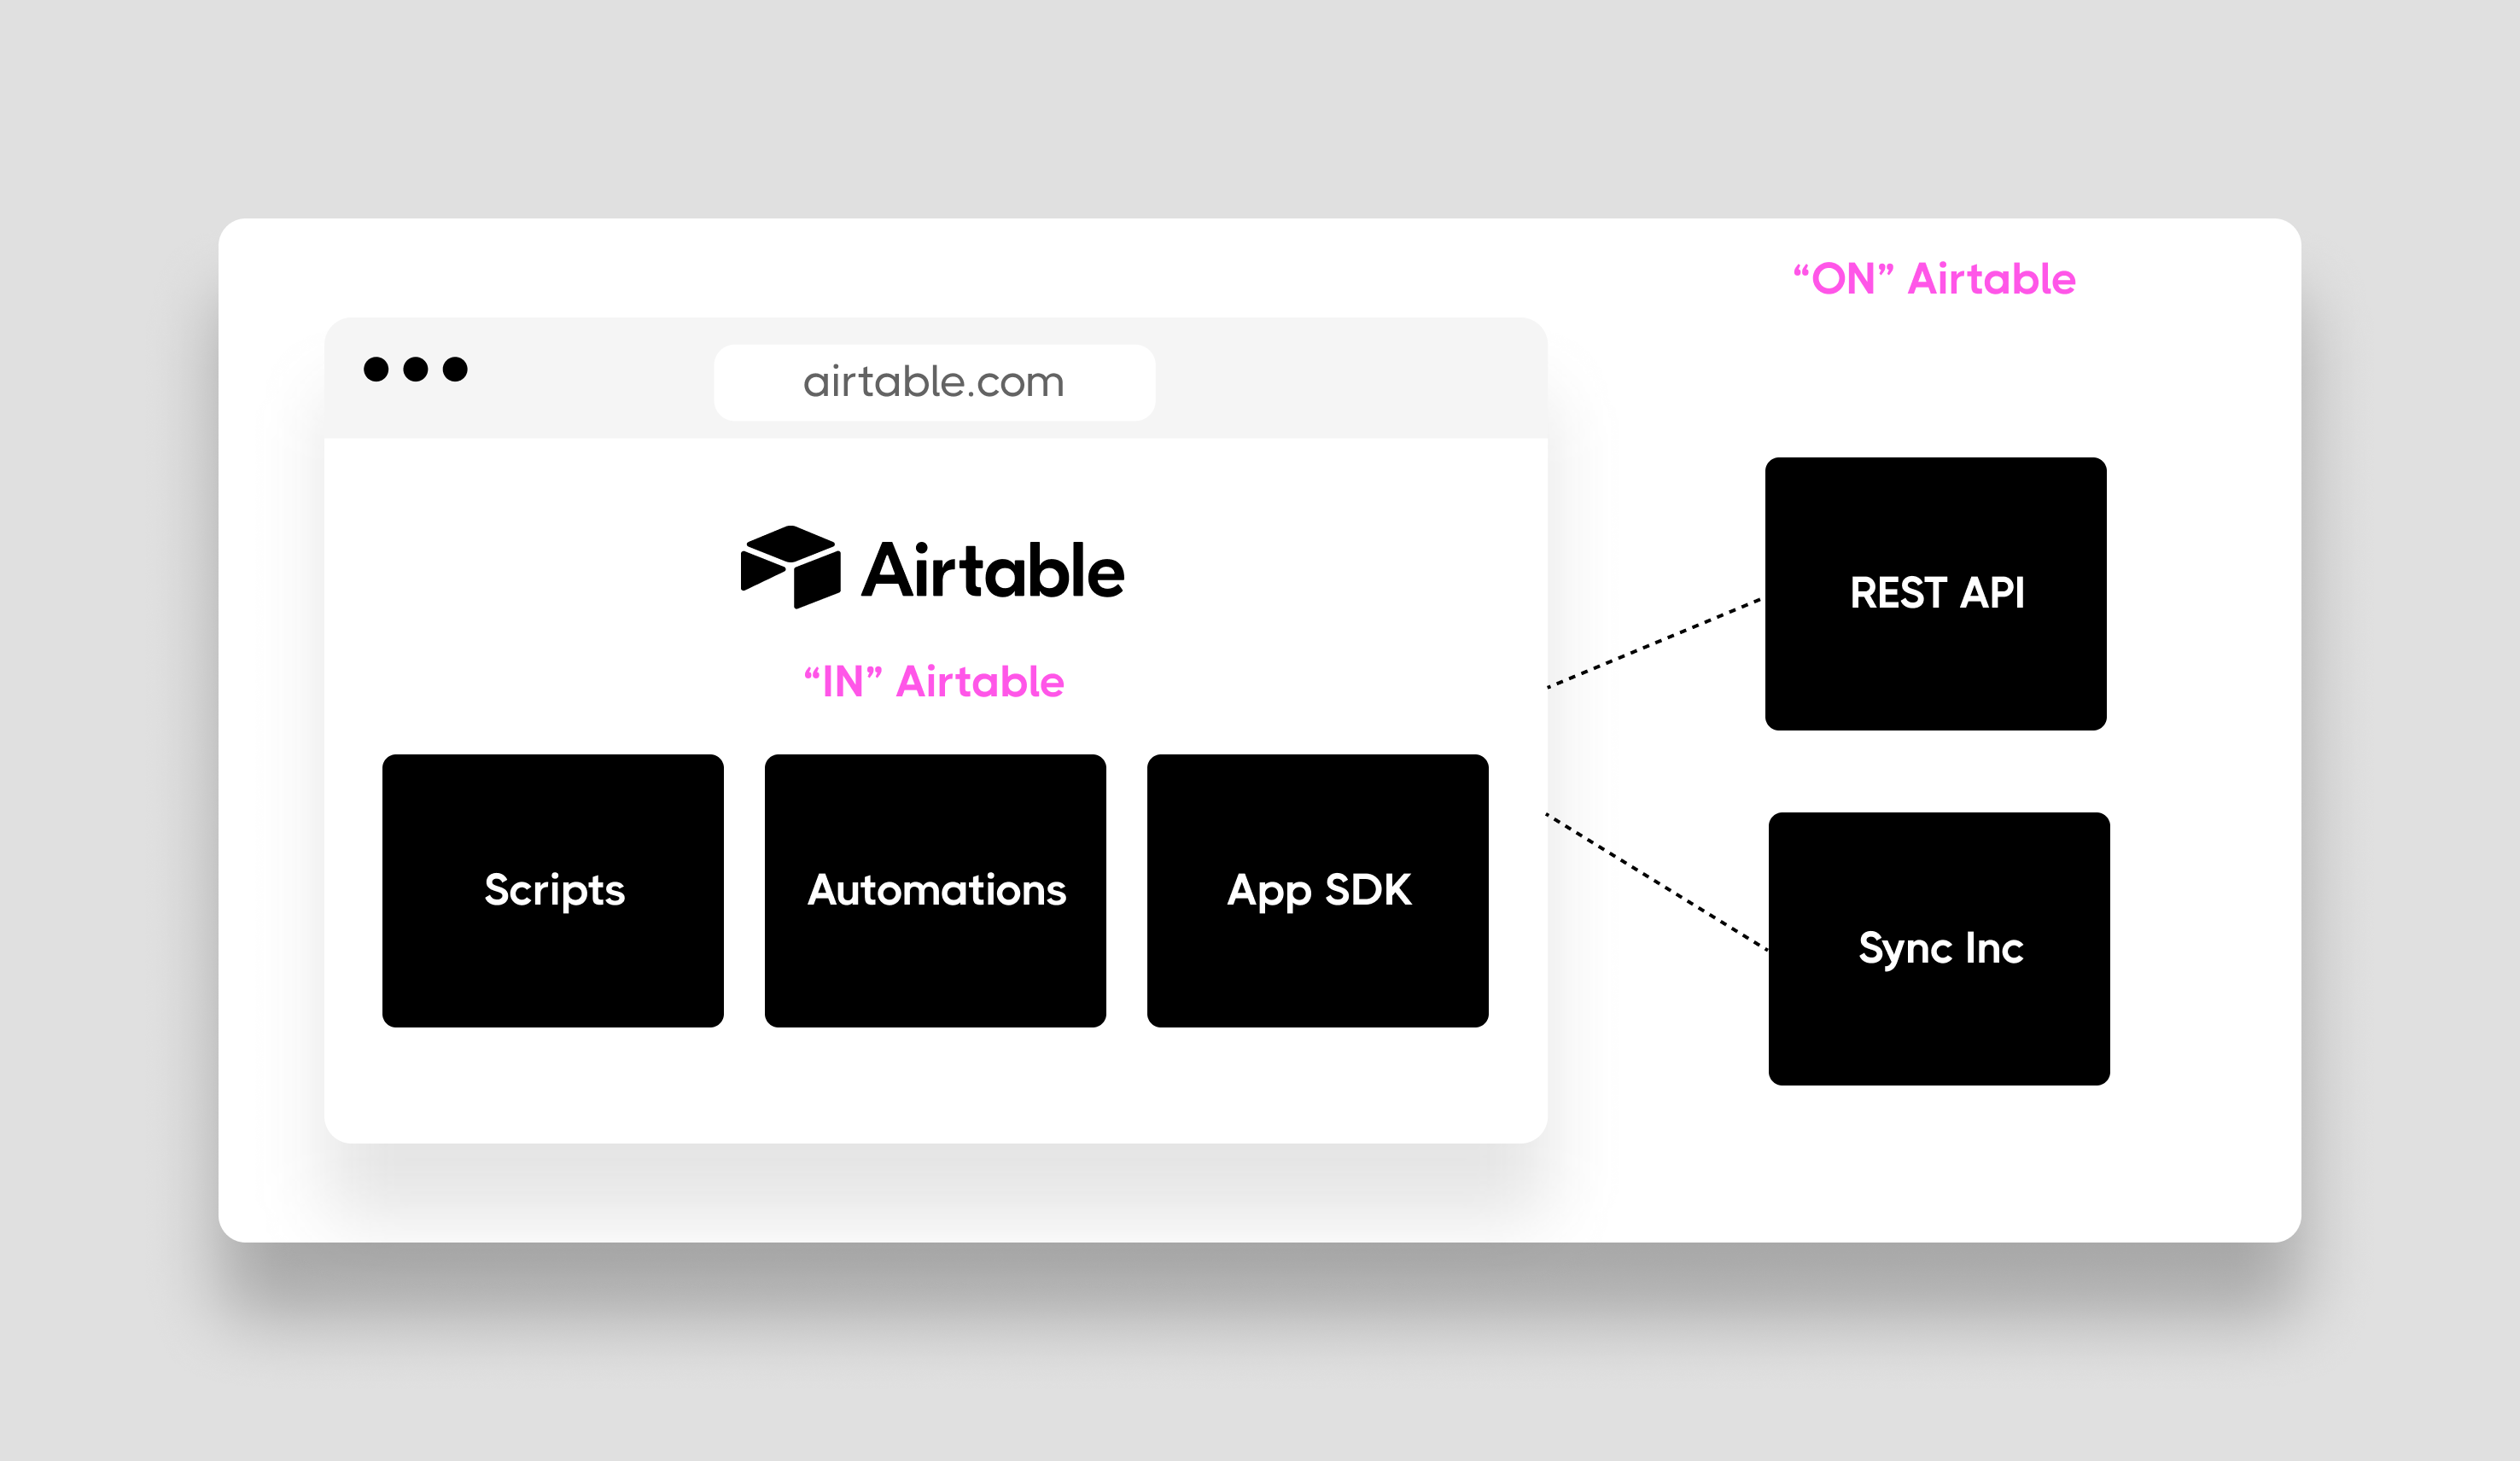 Building in or on Airtable